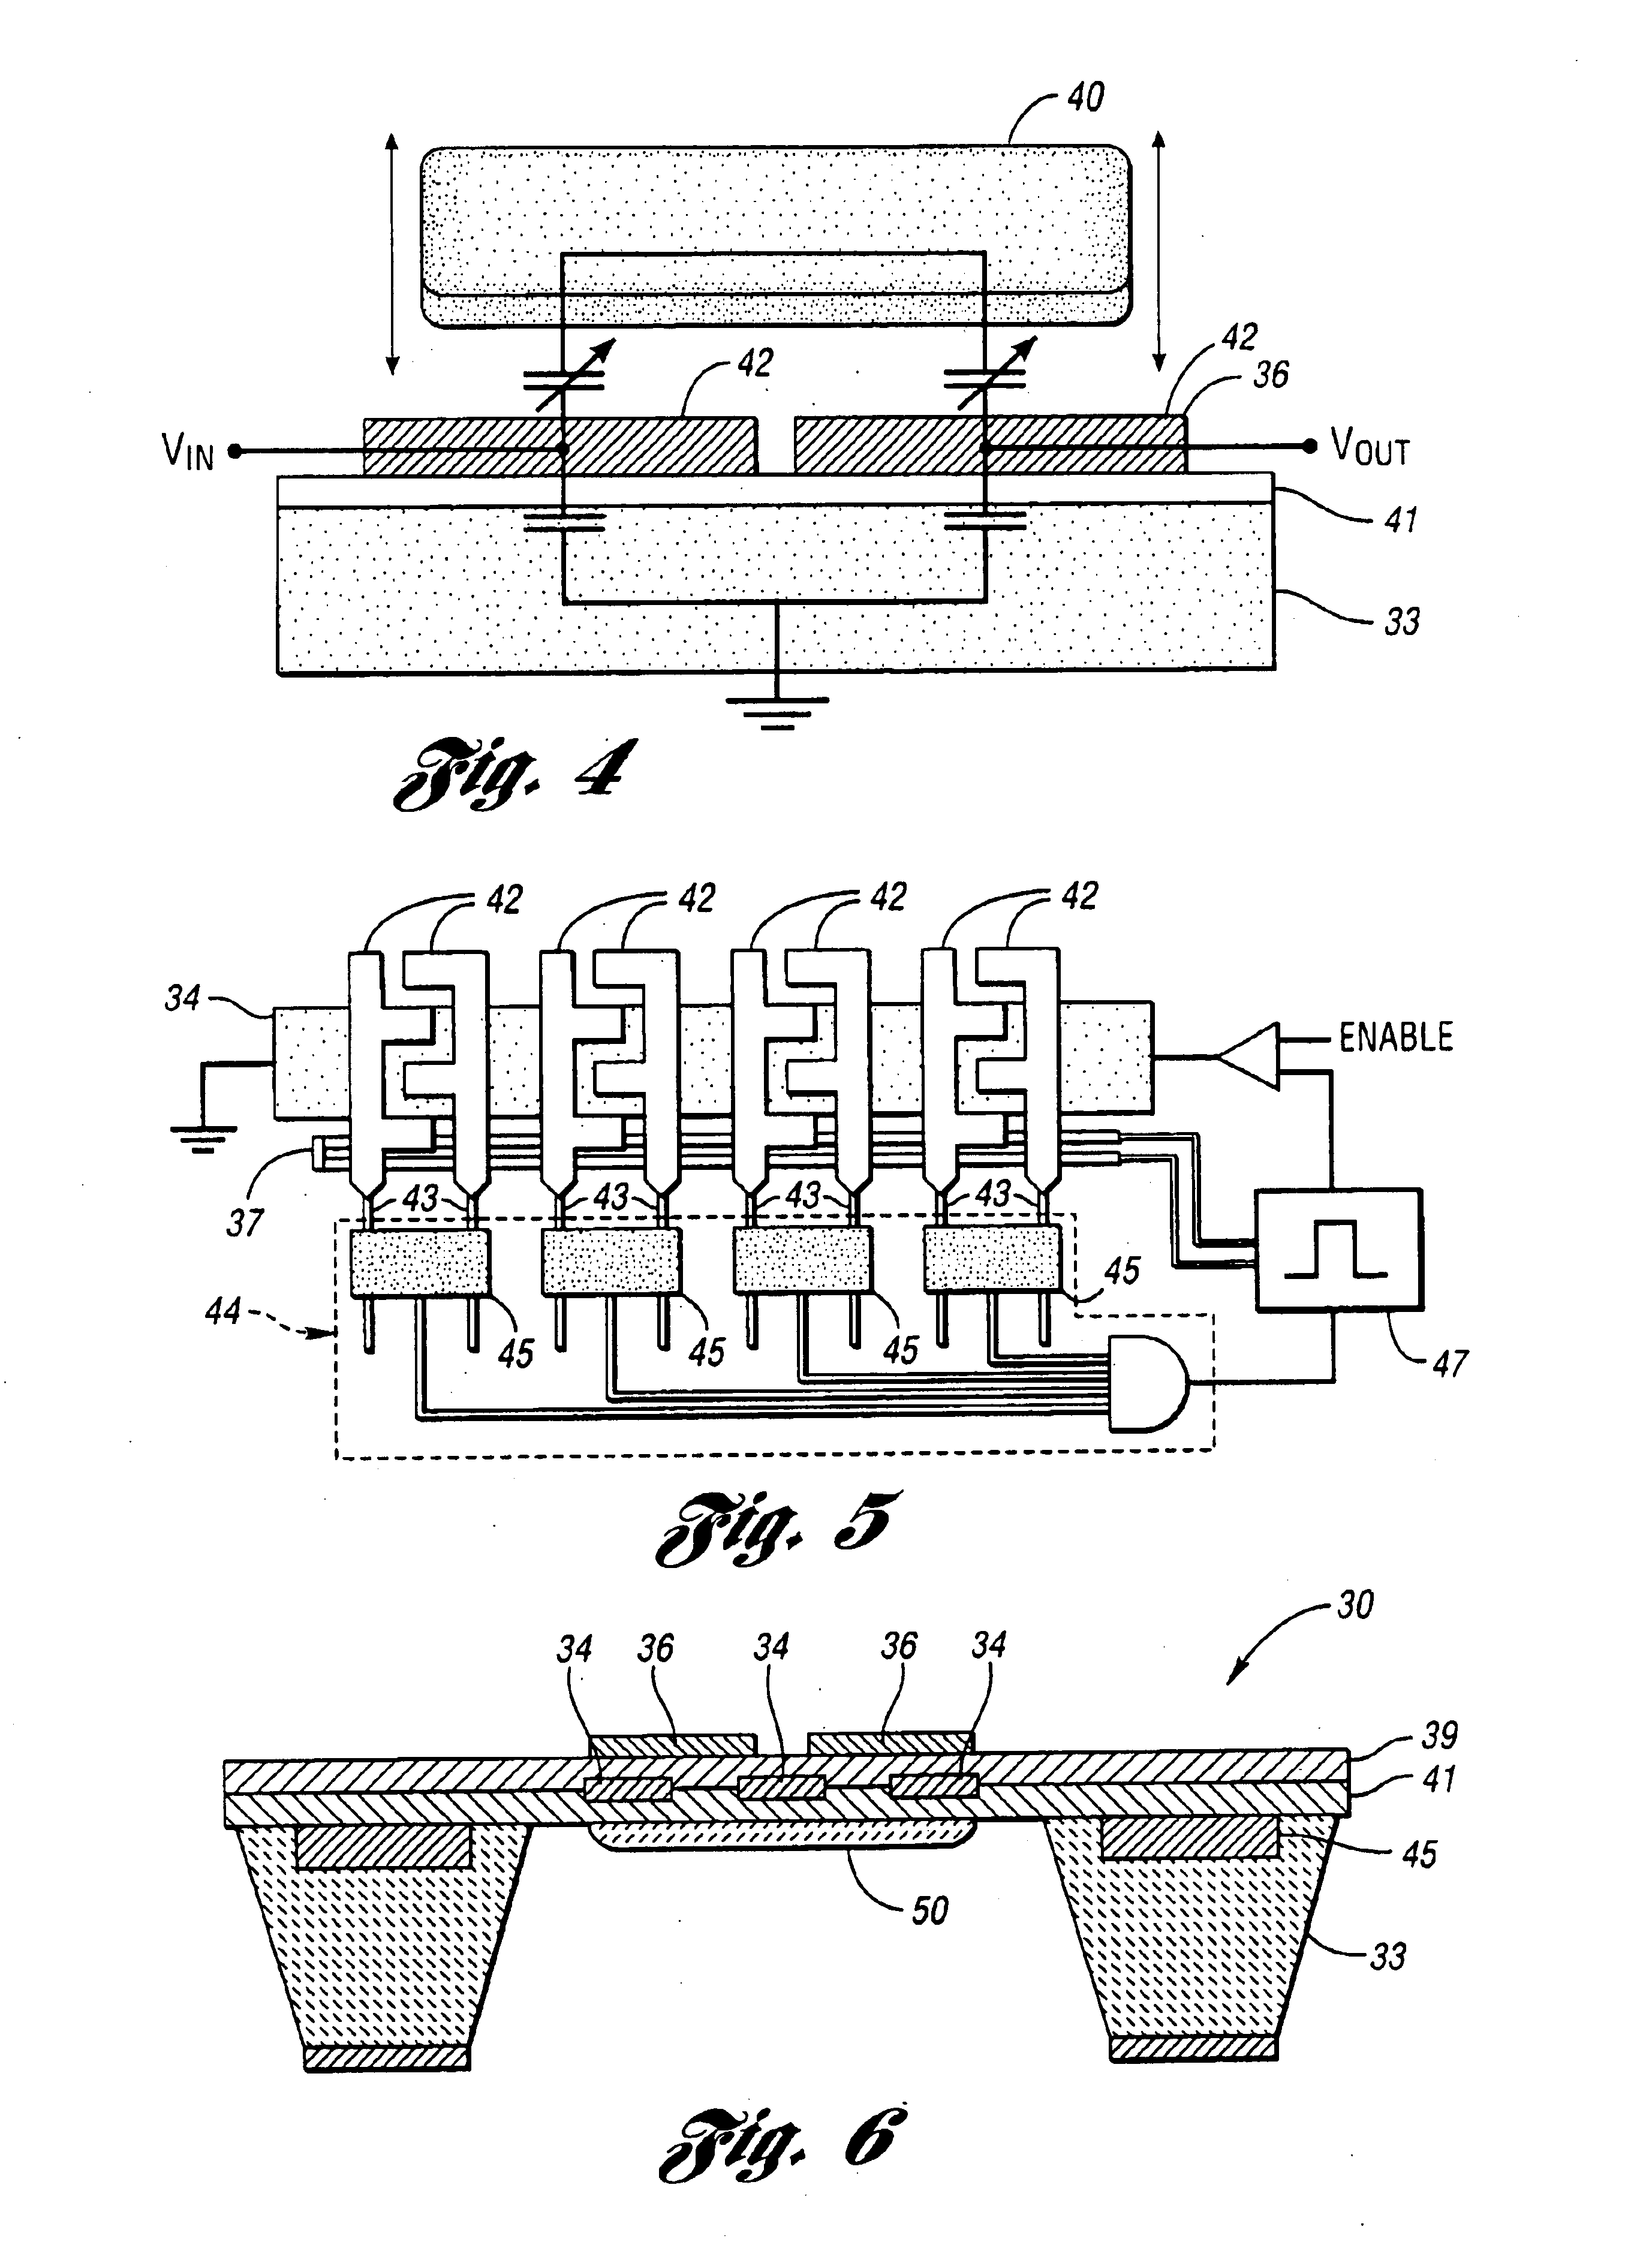 Method for electrically and mechanically connecting microstructures using solder